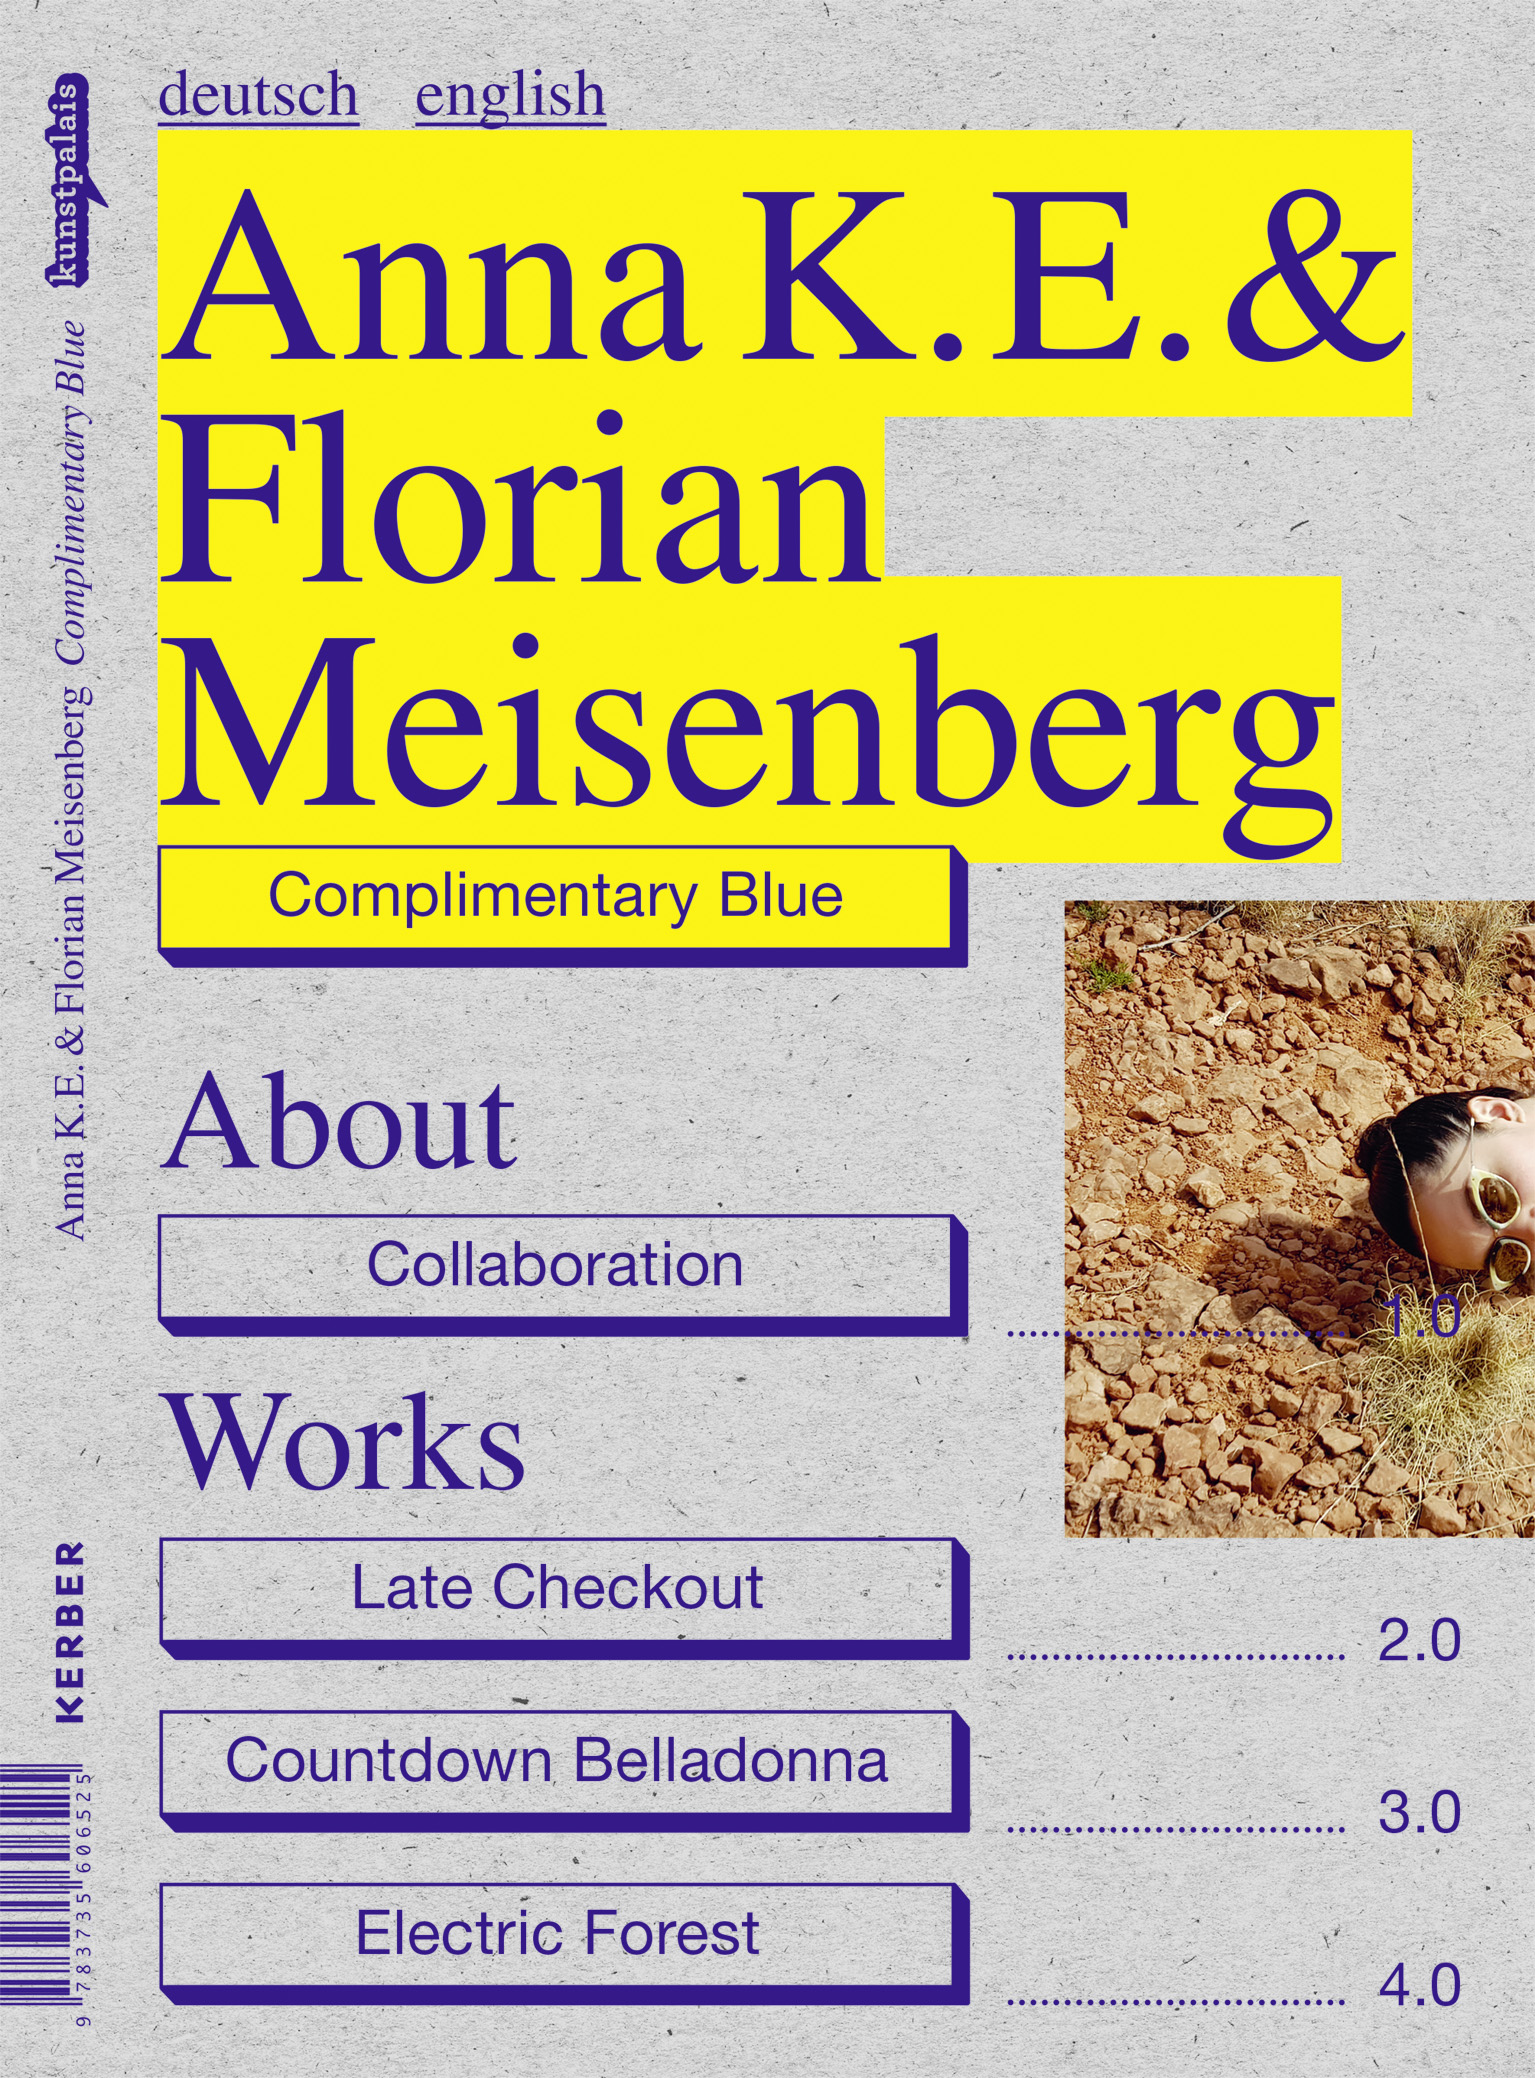 Image of the exhibition cataloge "Anna K.E. & Florian Meisenberg. Complimentary Blue"